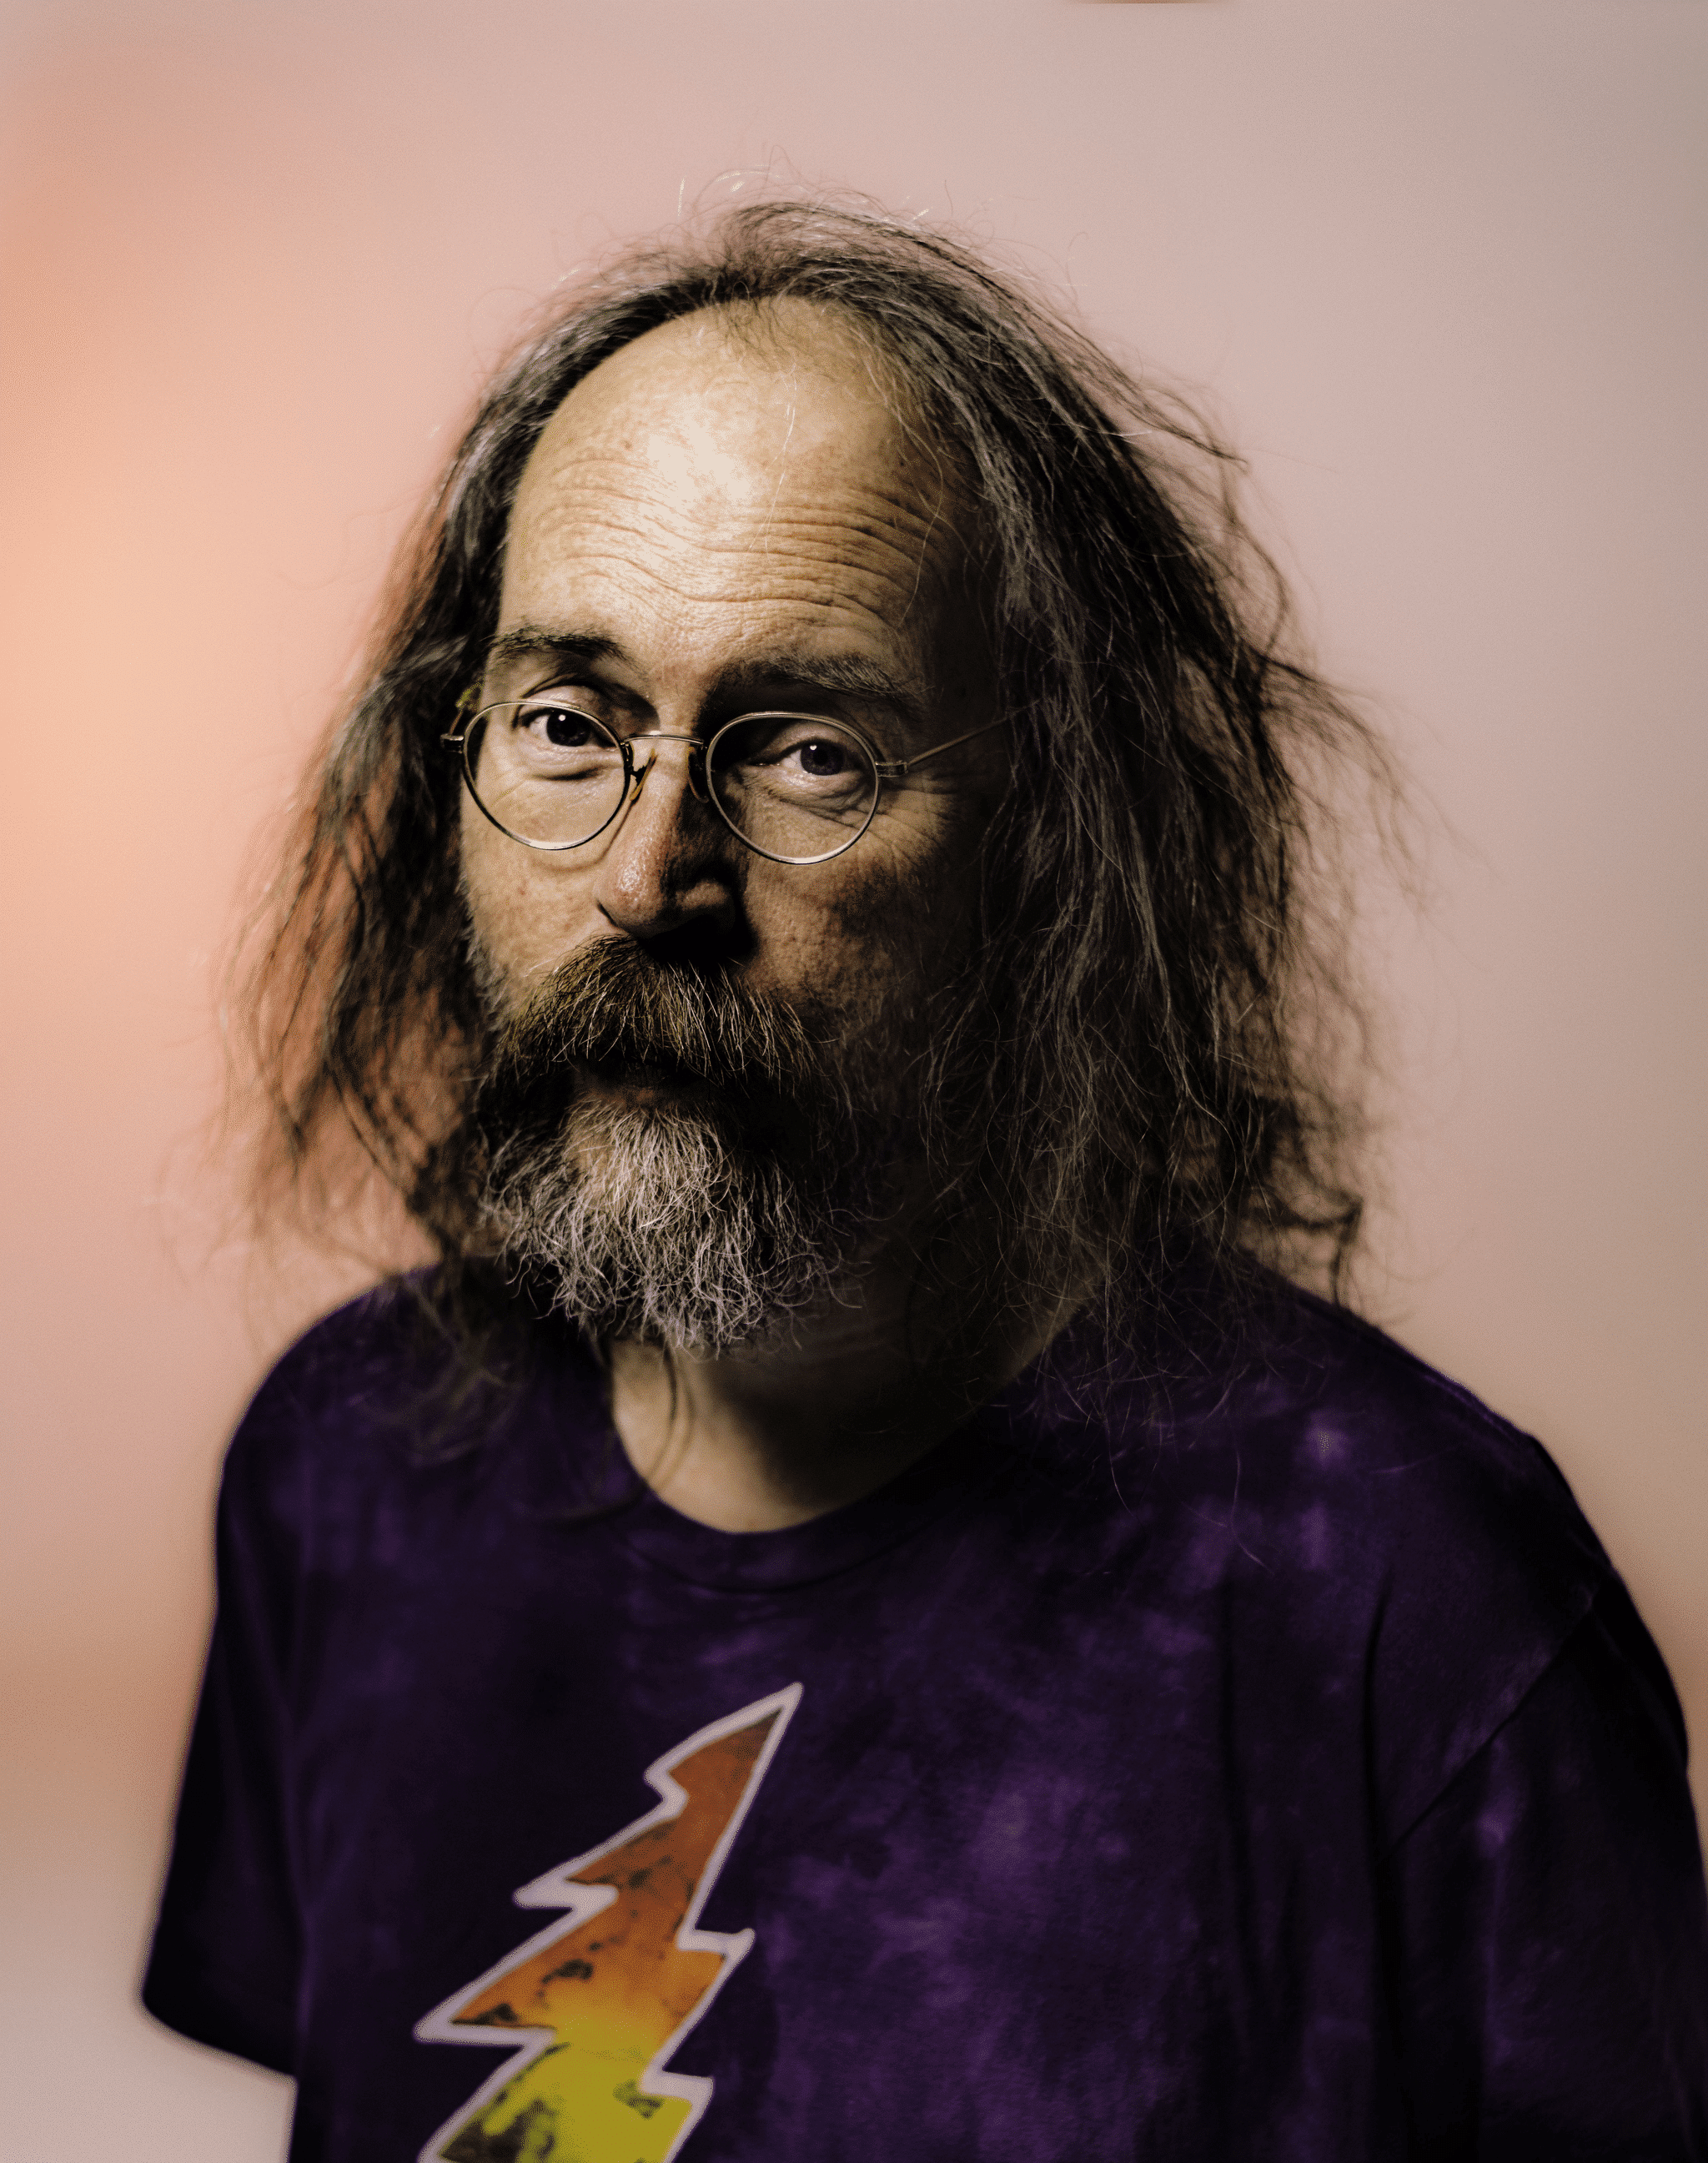 Charlie Parr Debuts “Cheap Wine” Off Forthcoming Self-titled LP